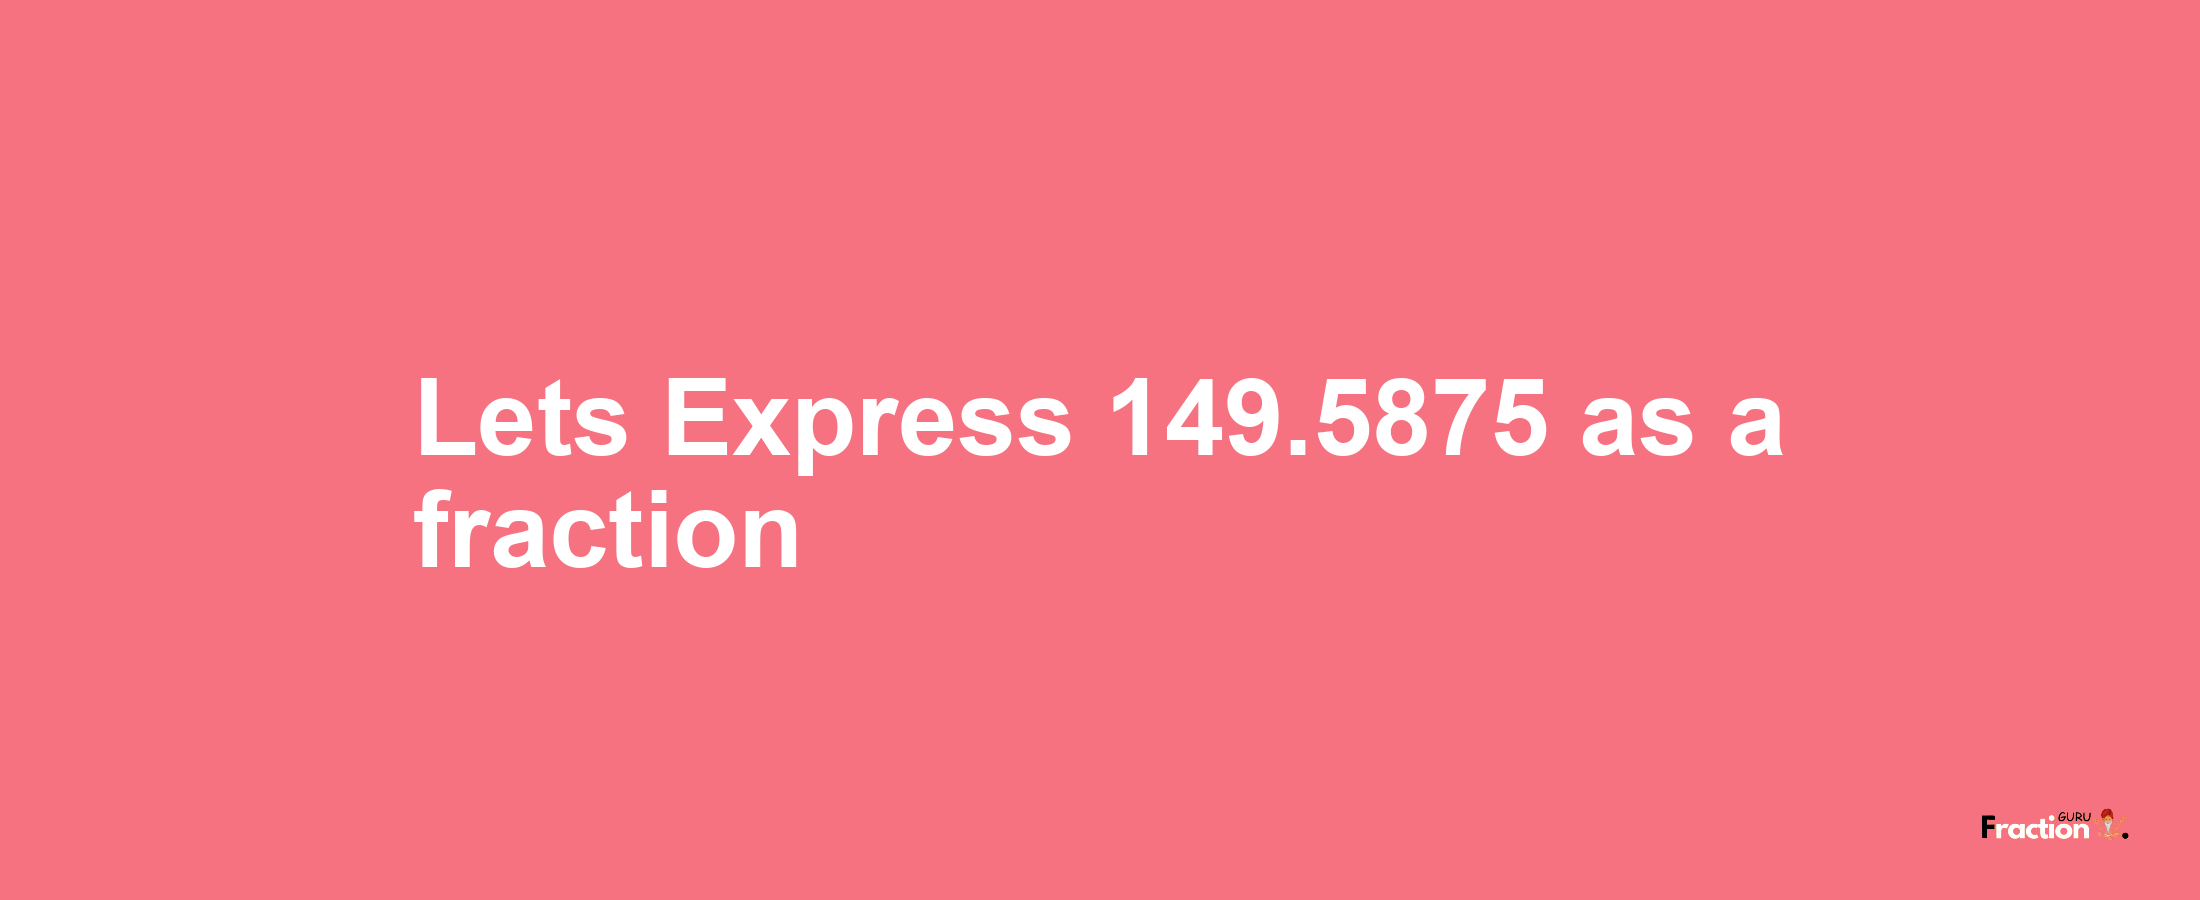 Lets Express 149.5875 as afraction